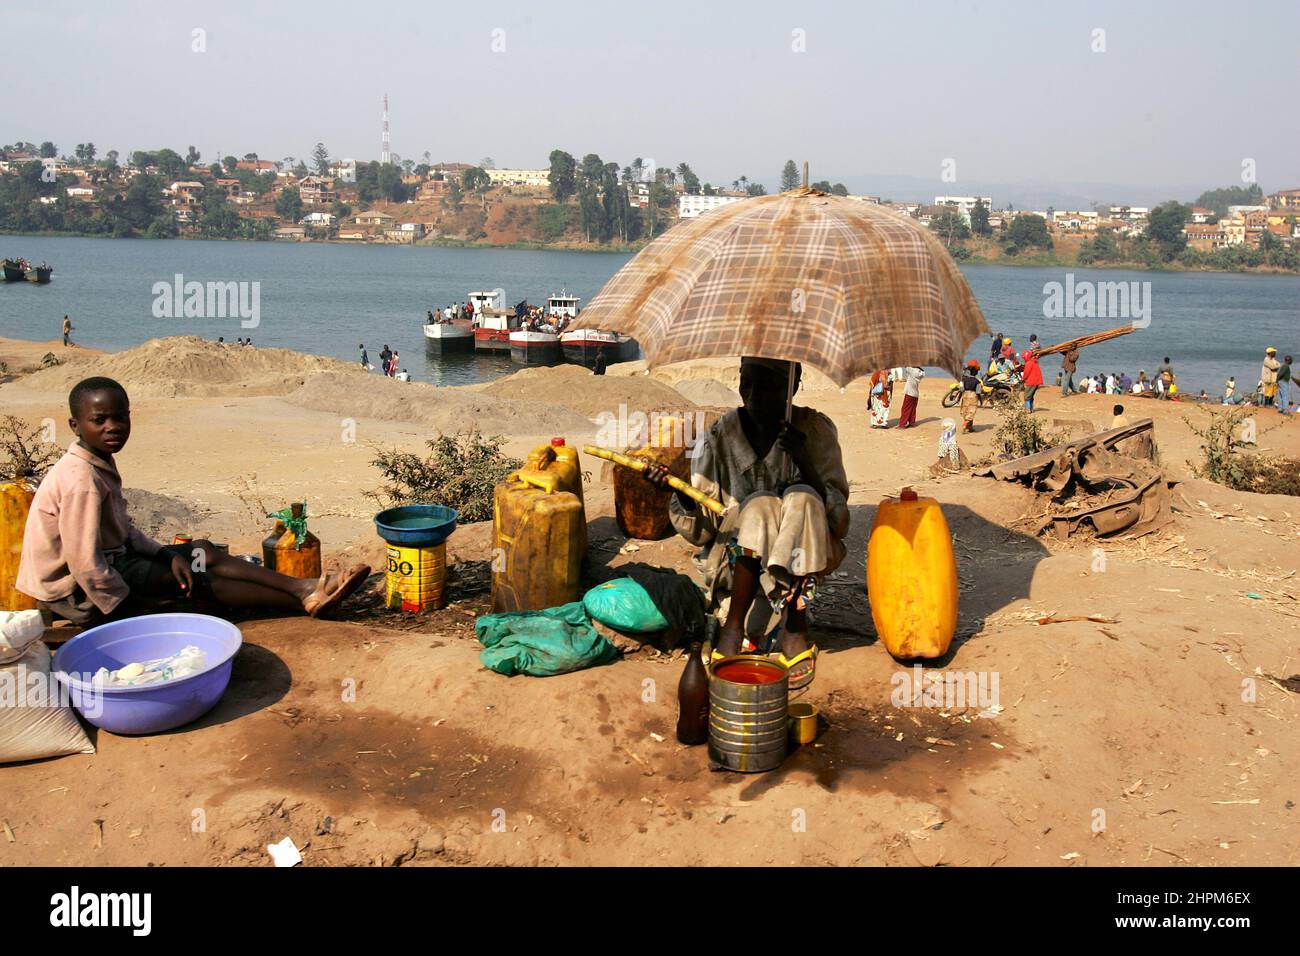 Everyday life at Lake Kivu near Bukavu.  The picture is deceptive, however, as war has been waged in eastern Congo since 1996. Mai Mai warriors and Interahamwer mass murderers from Rwanda have killed over 4 million people. Stock Photo